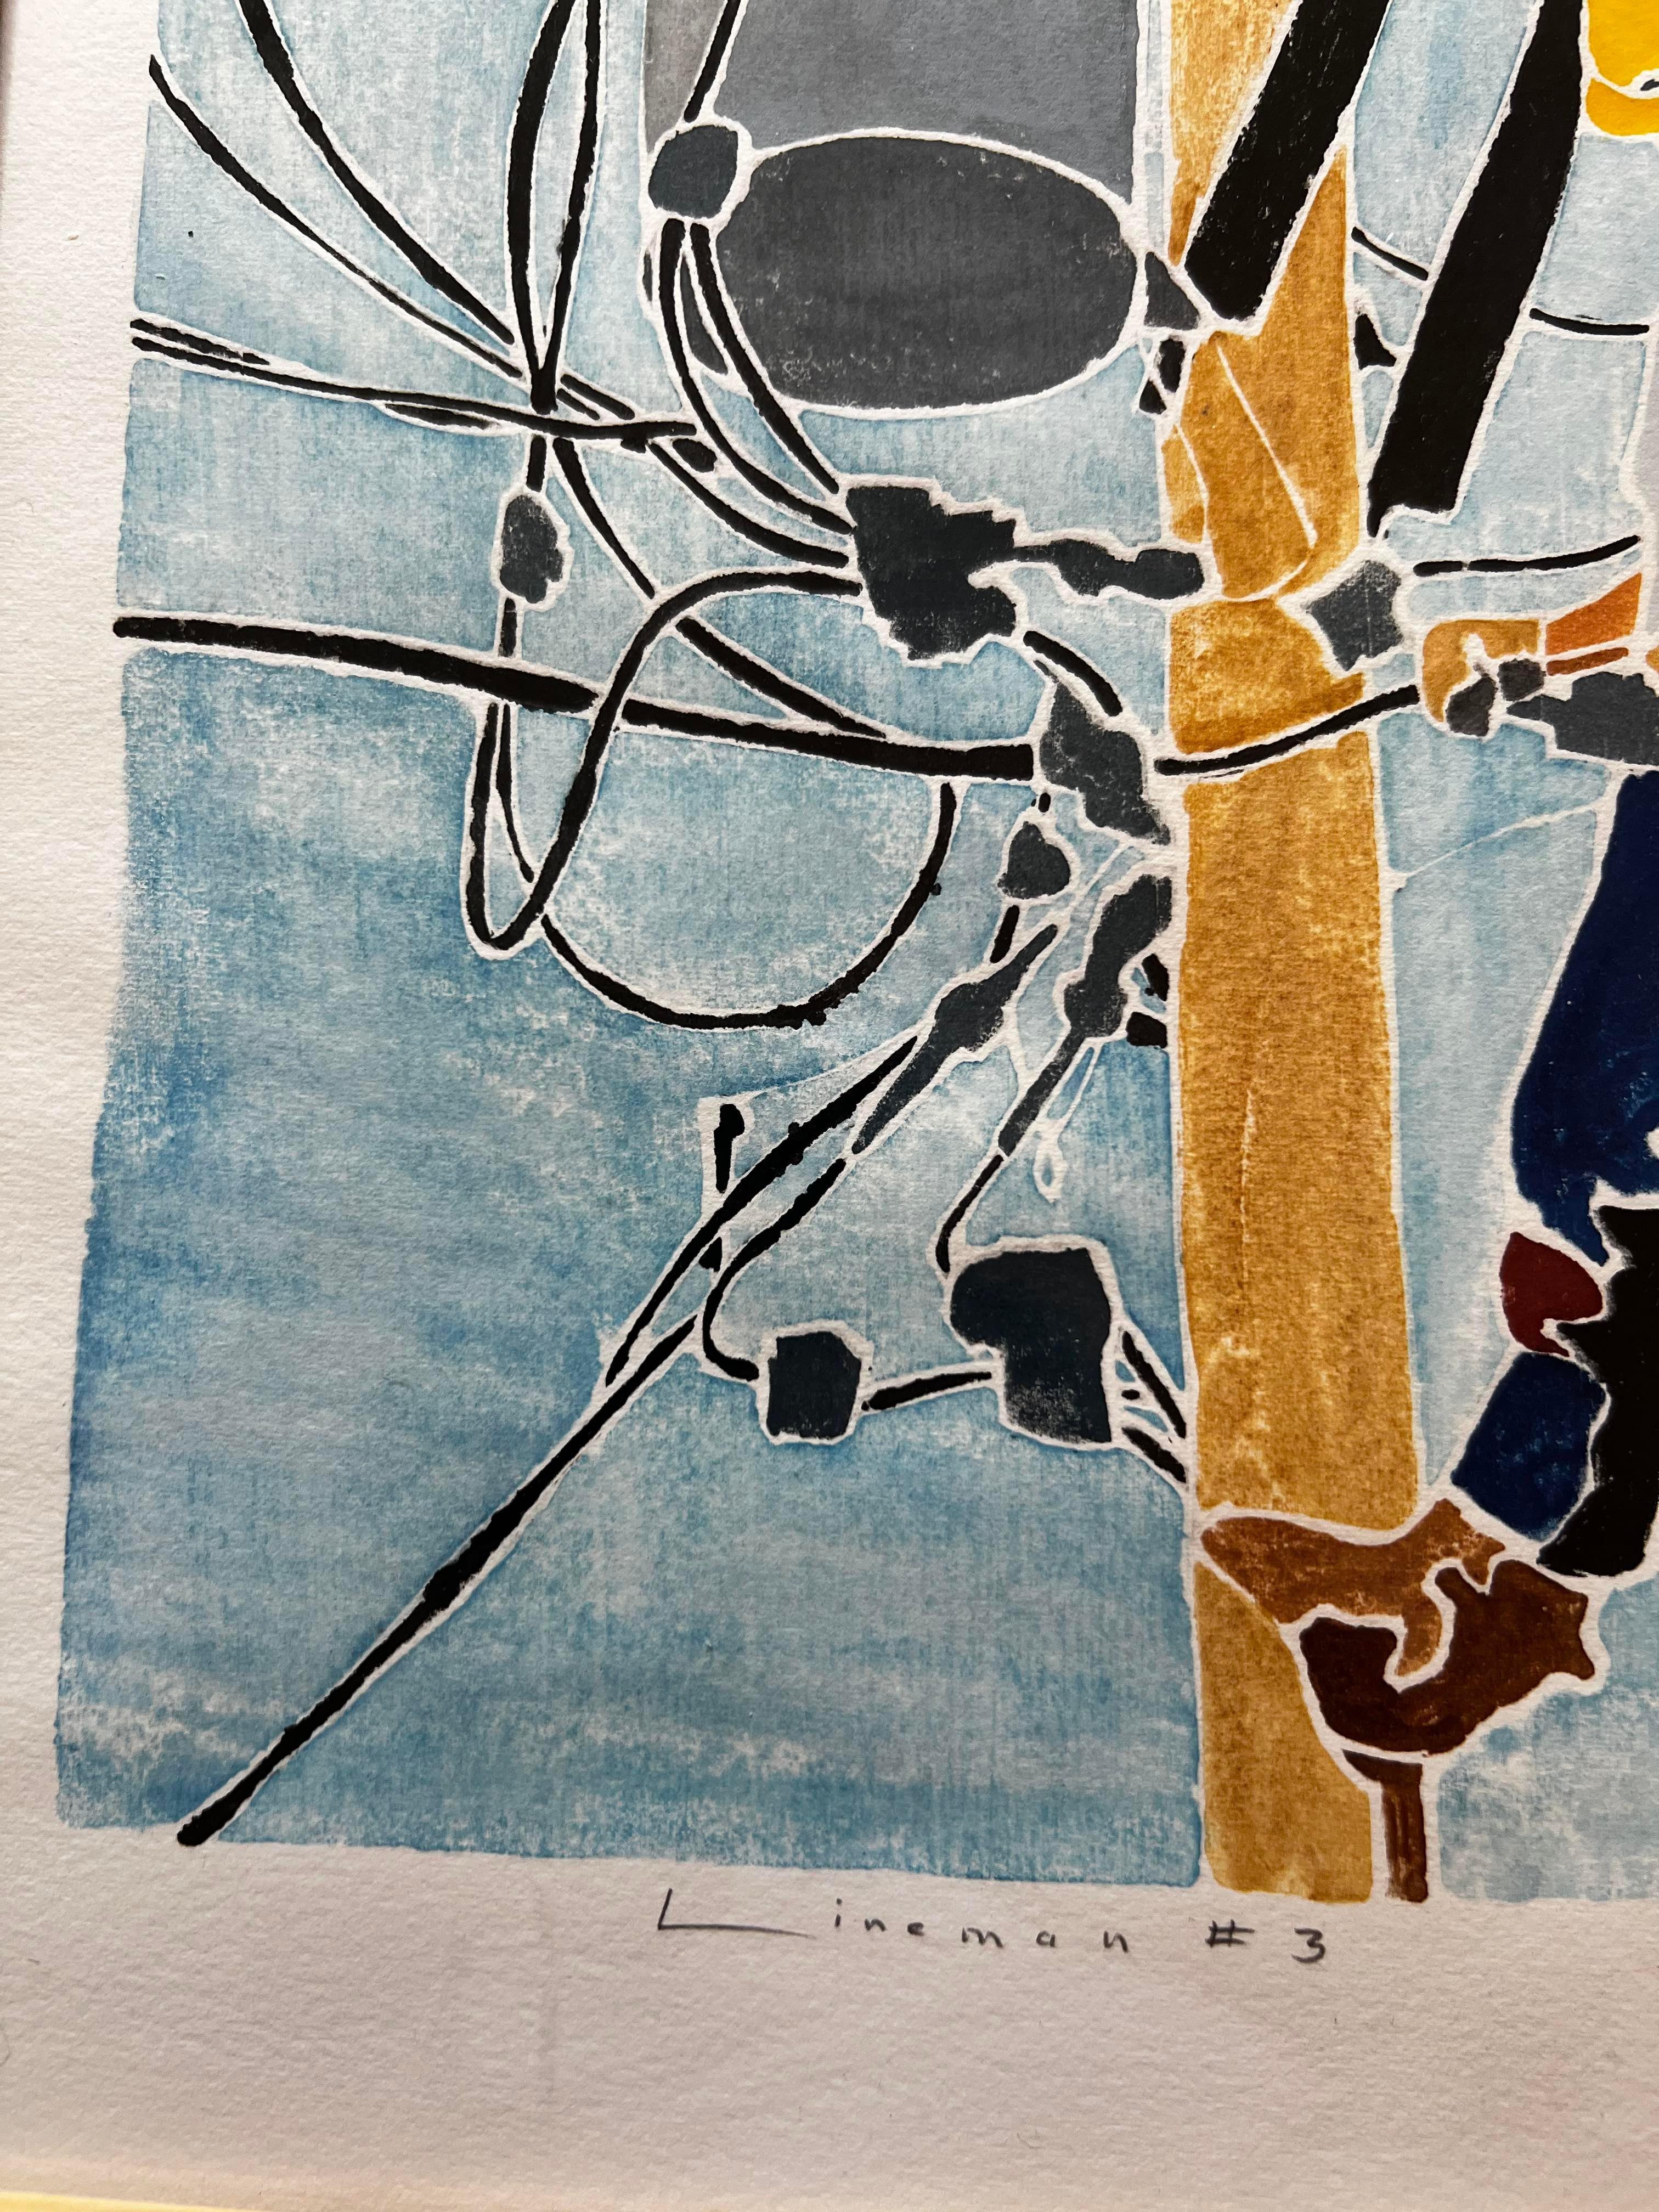 This color woodblock print is of a person working on a power line. These prints involve careful separation of colors to create the forms and in this print particularly are extremely detailed. The yellow-orange highlights paired with the blue-gray